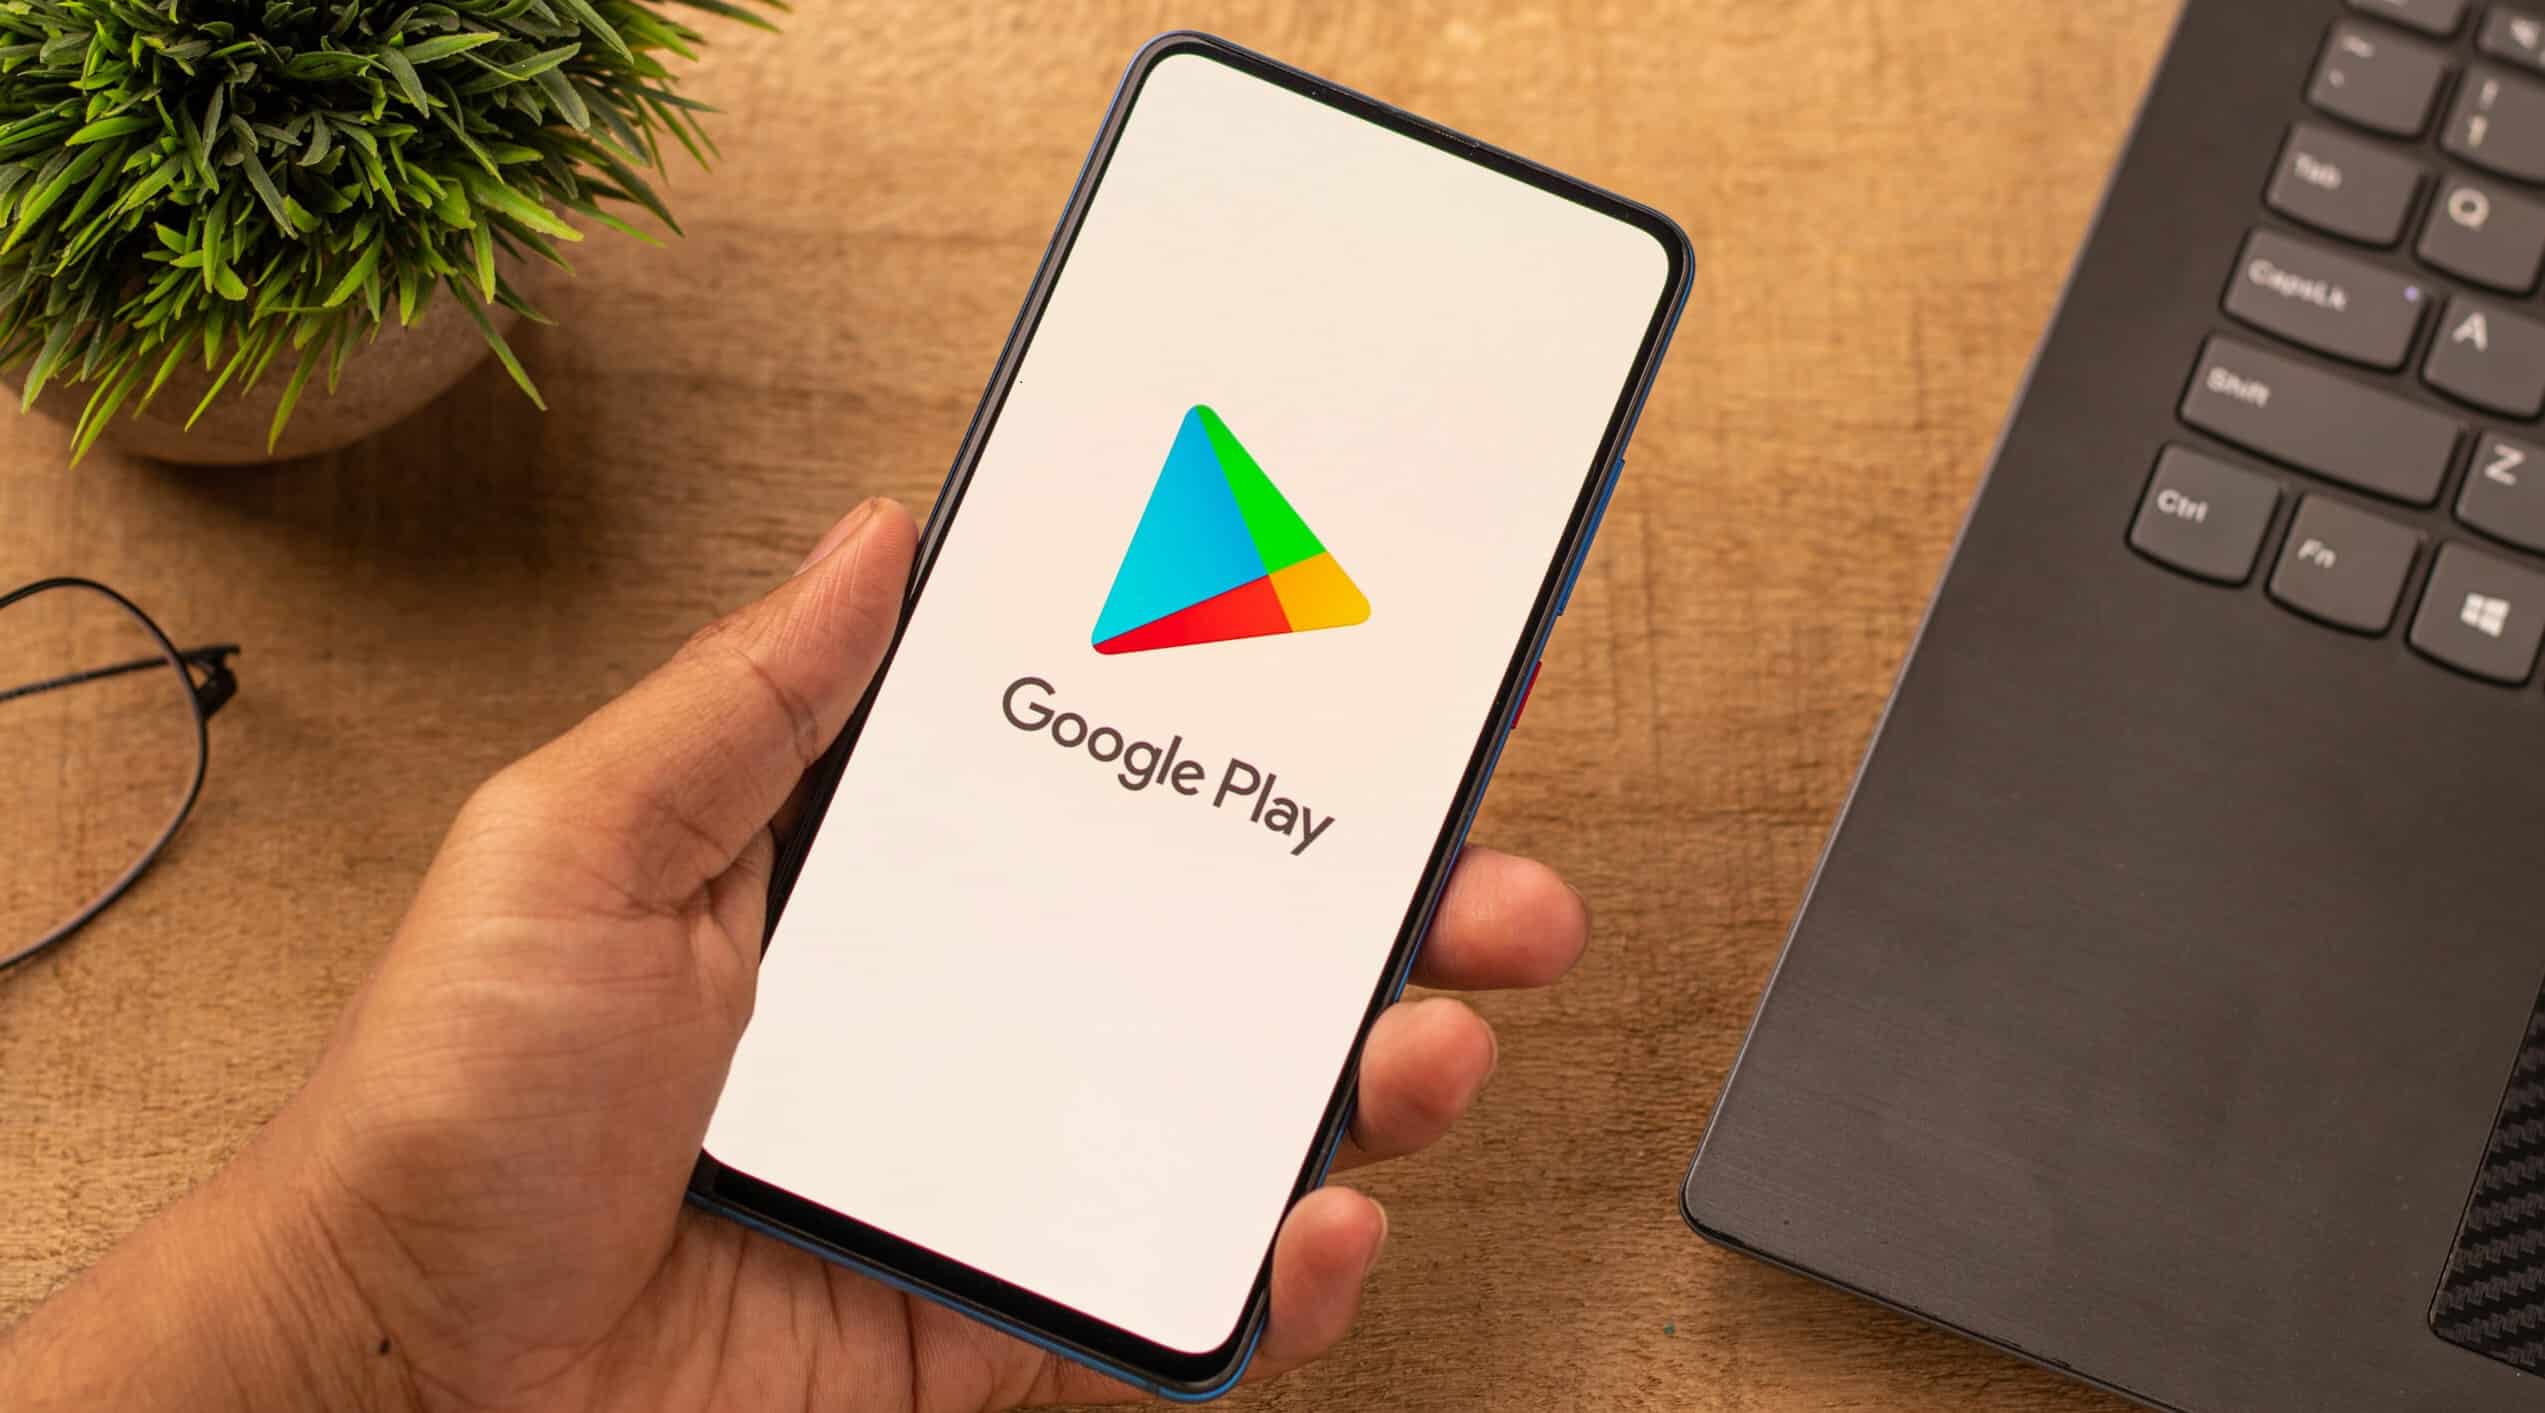 How To Transfer Google Play Credit To Another Account